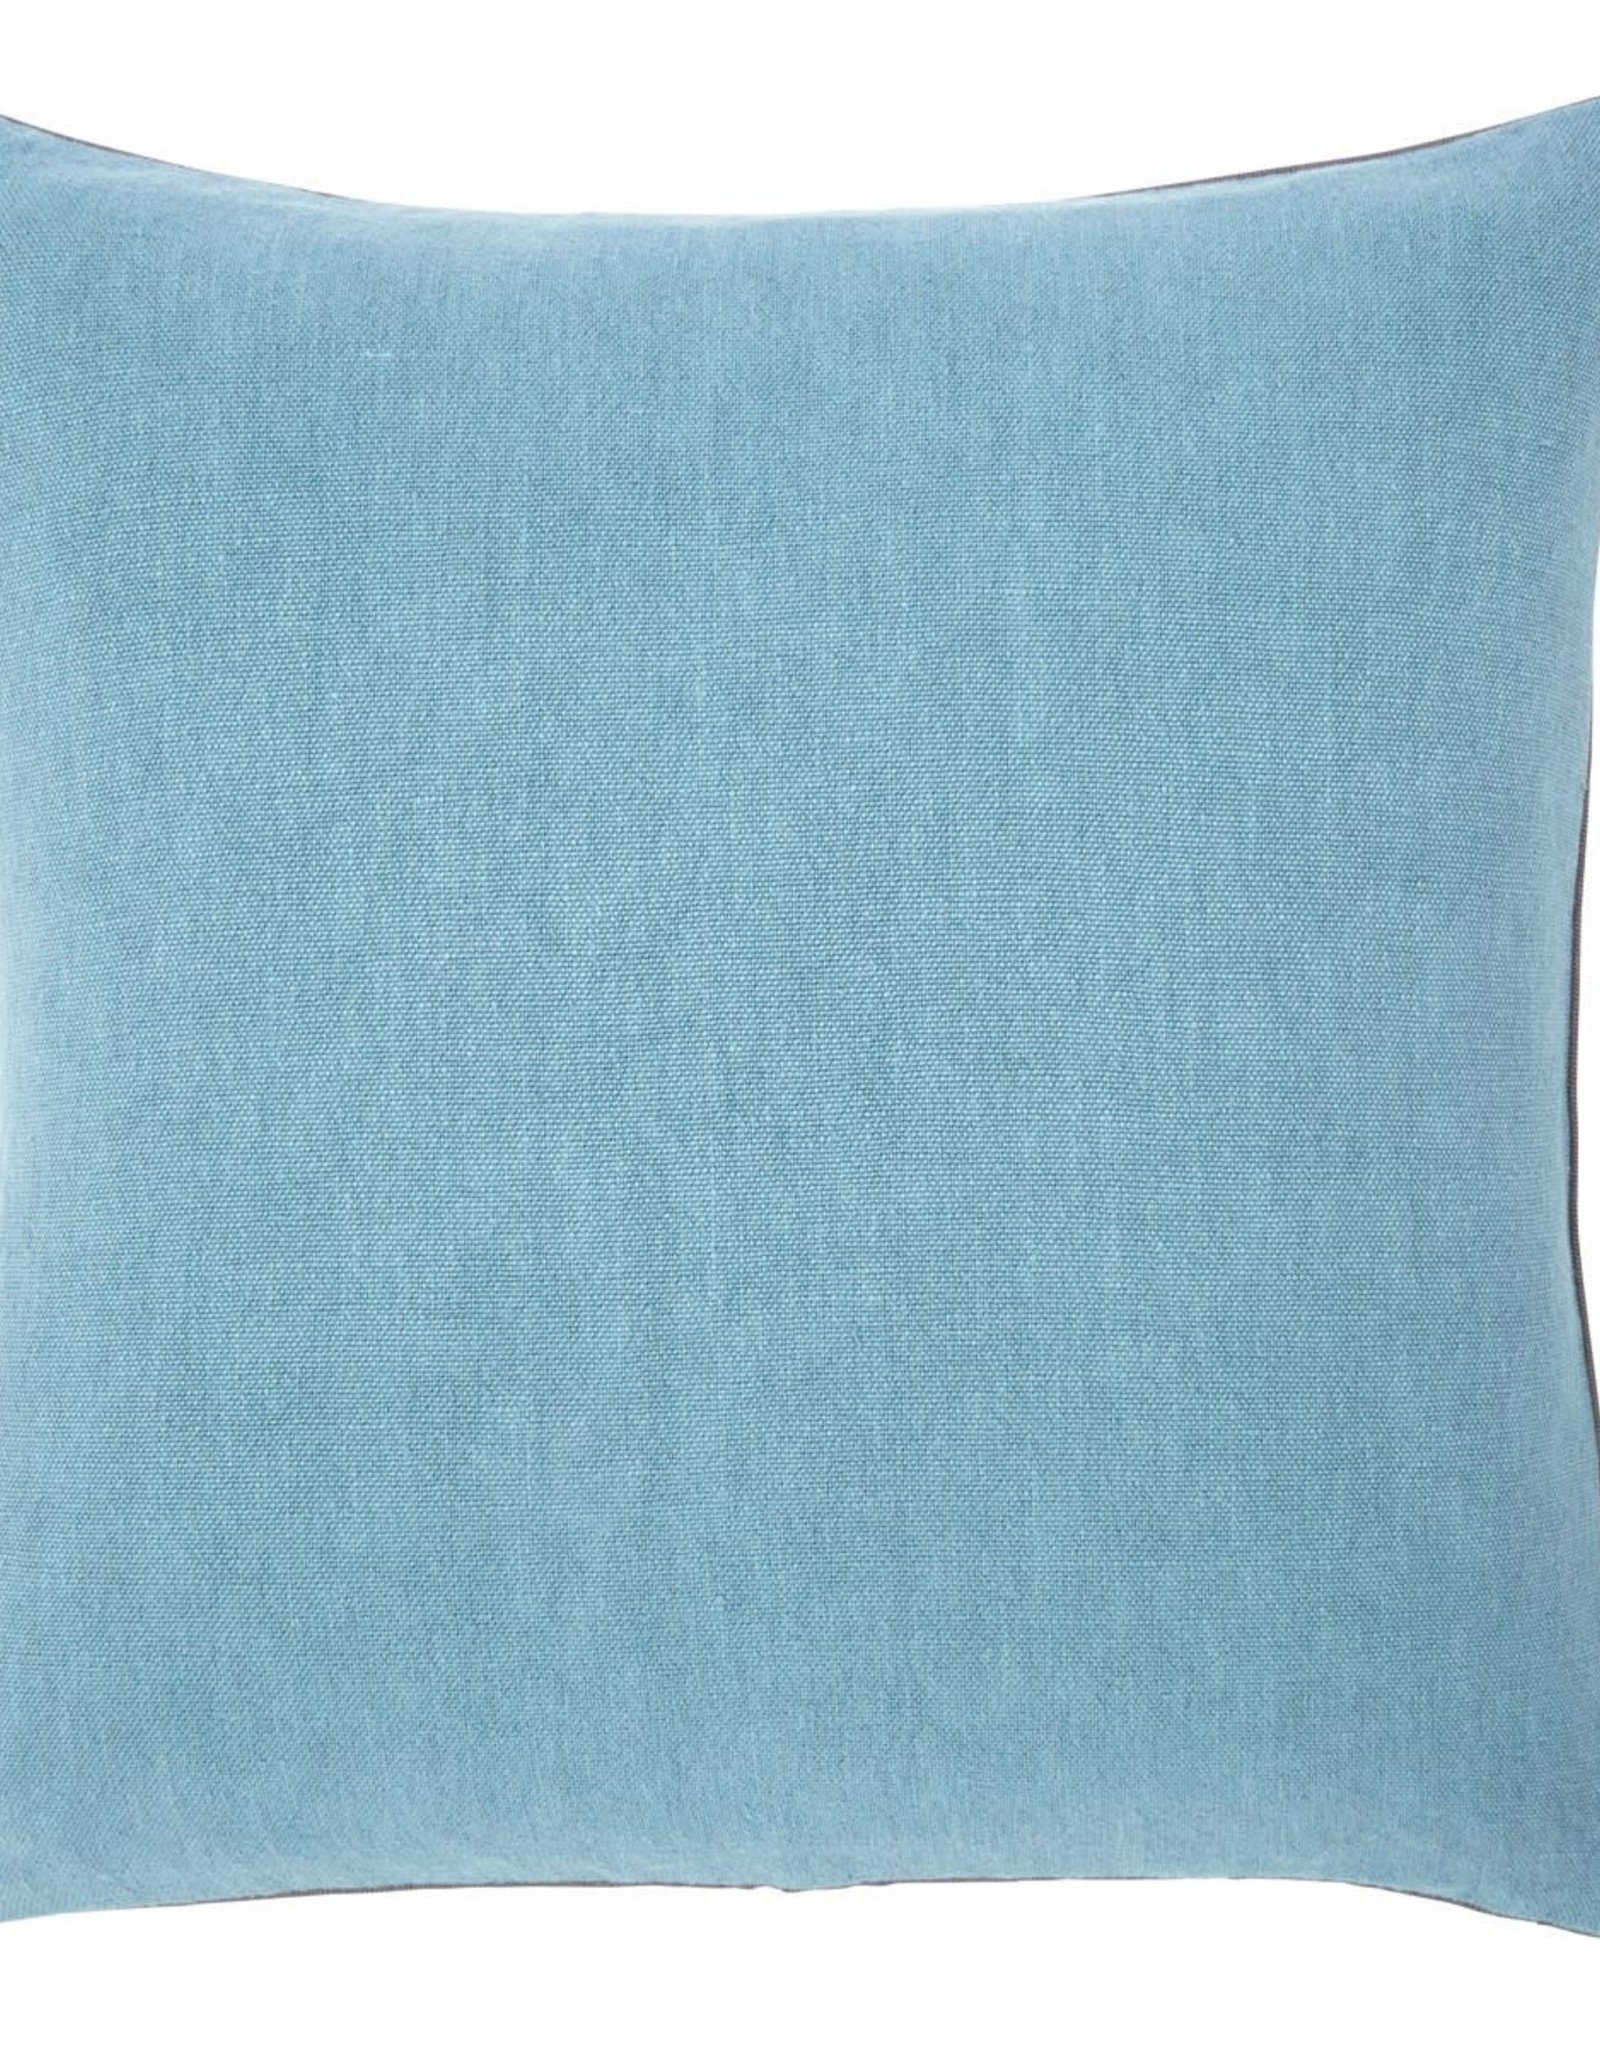 Iosis by Yves Delorme Pigment Decorative Pillow 18x18 by Iosis - Yves Delorme